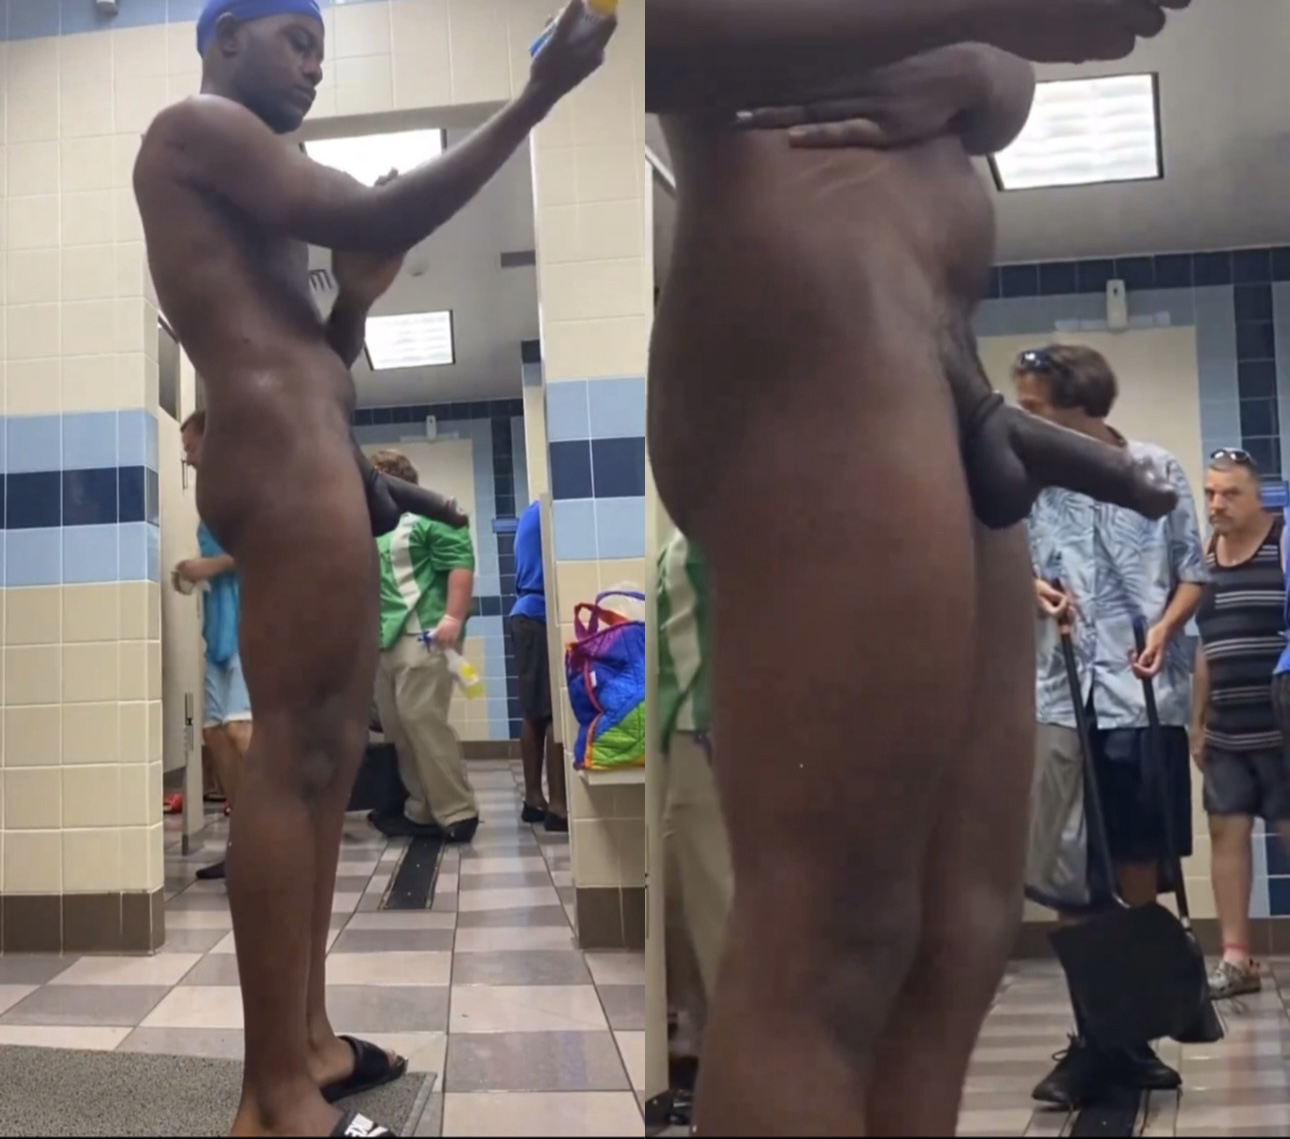 *EXHIBITIONIST* showers in busy locker room